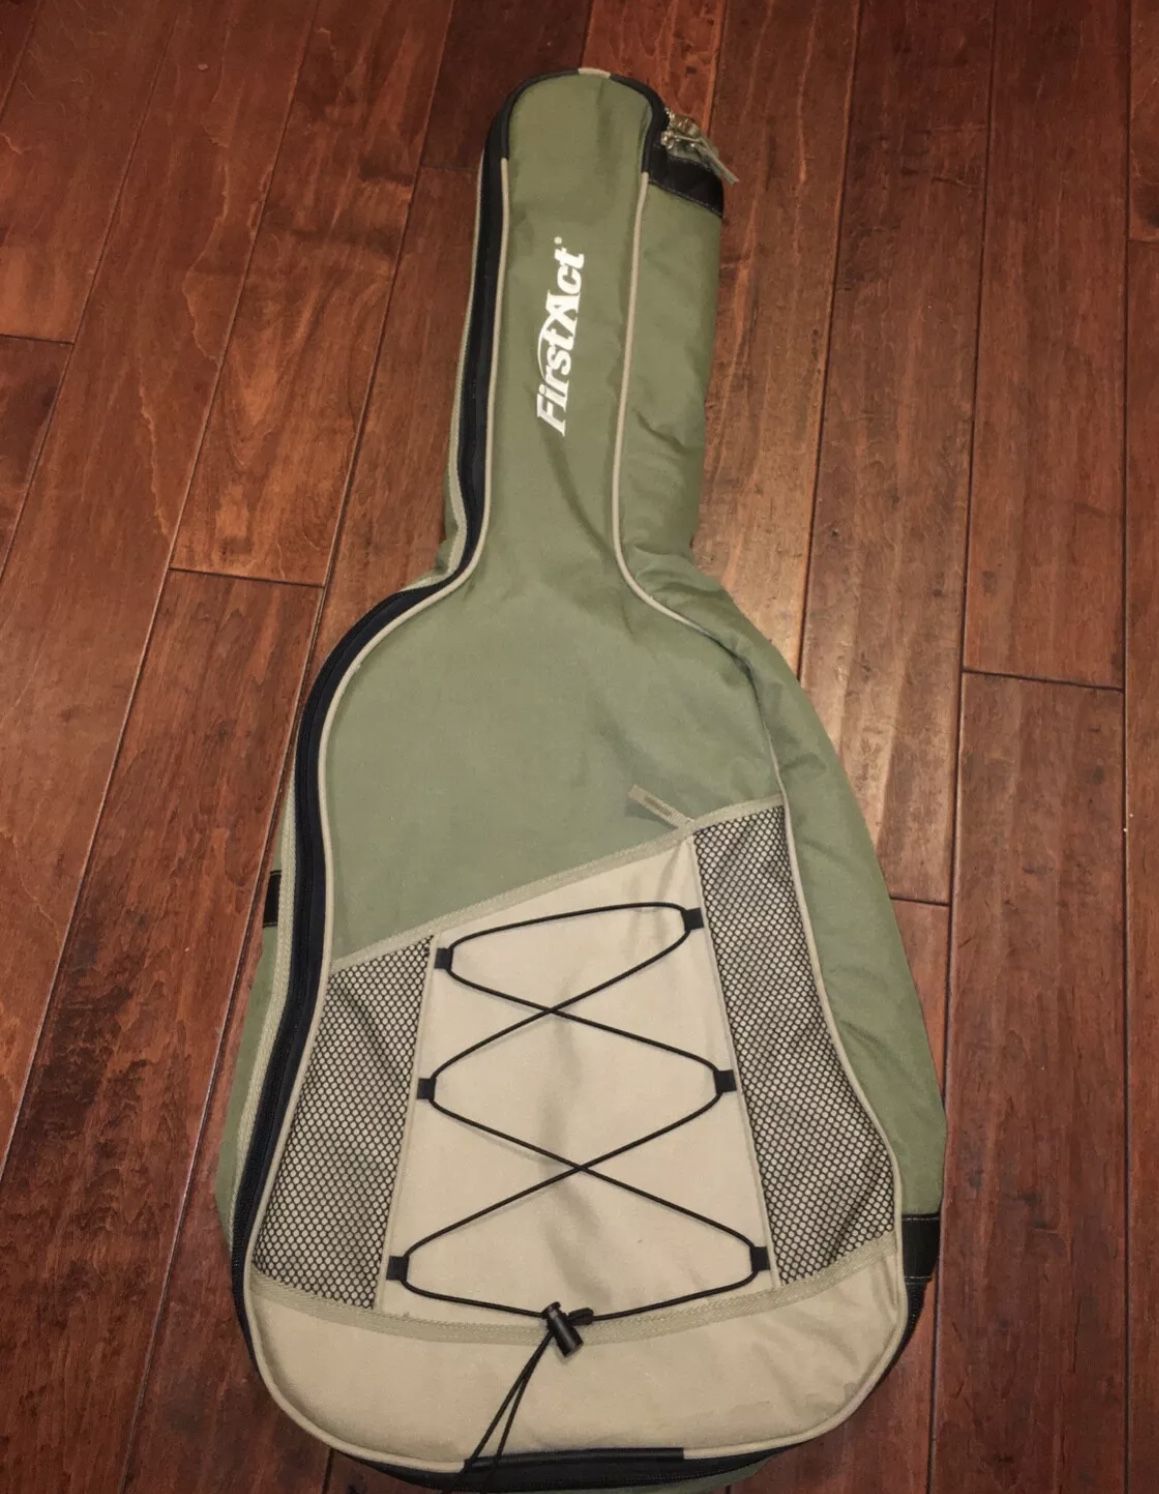 FIRST ACT Soft Guitar Bag, Backpack with Shoulder Straps, Green Tan (Very good condition)